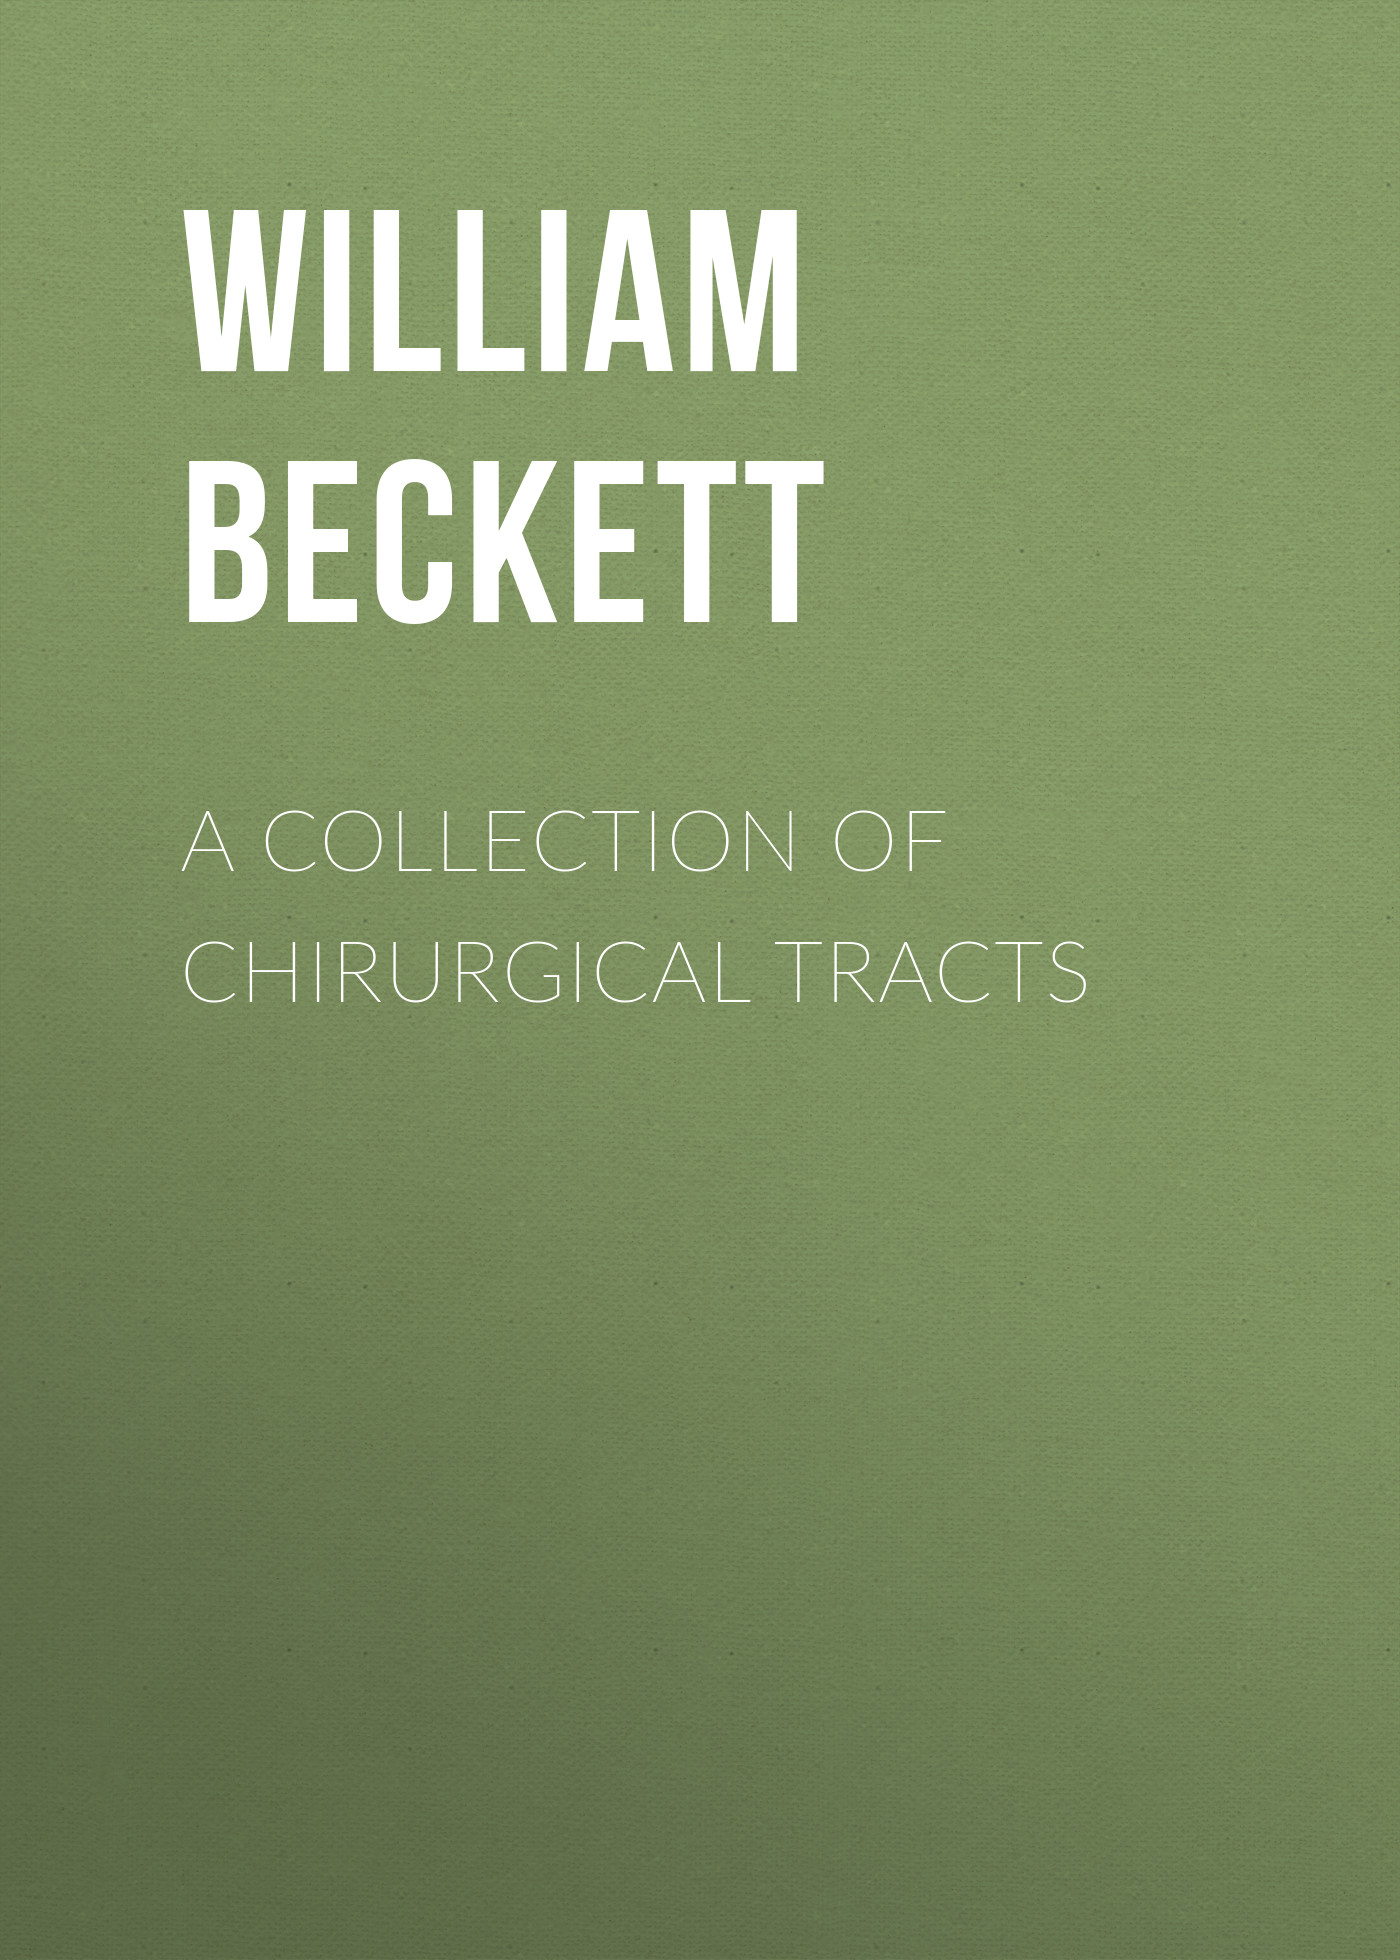 A Collection of Chirurgical Tracts